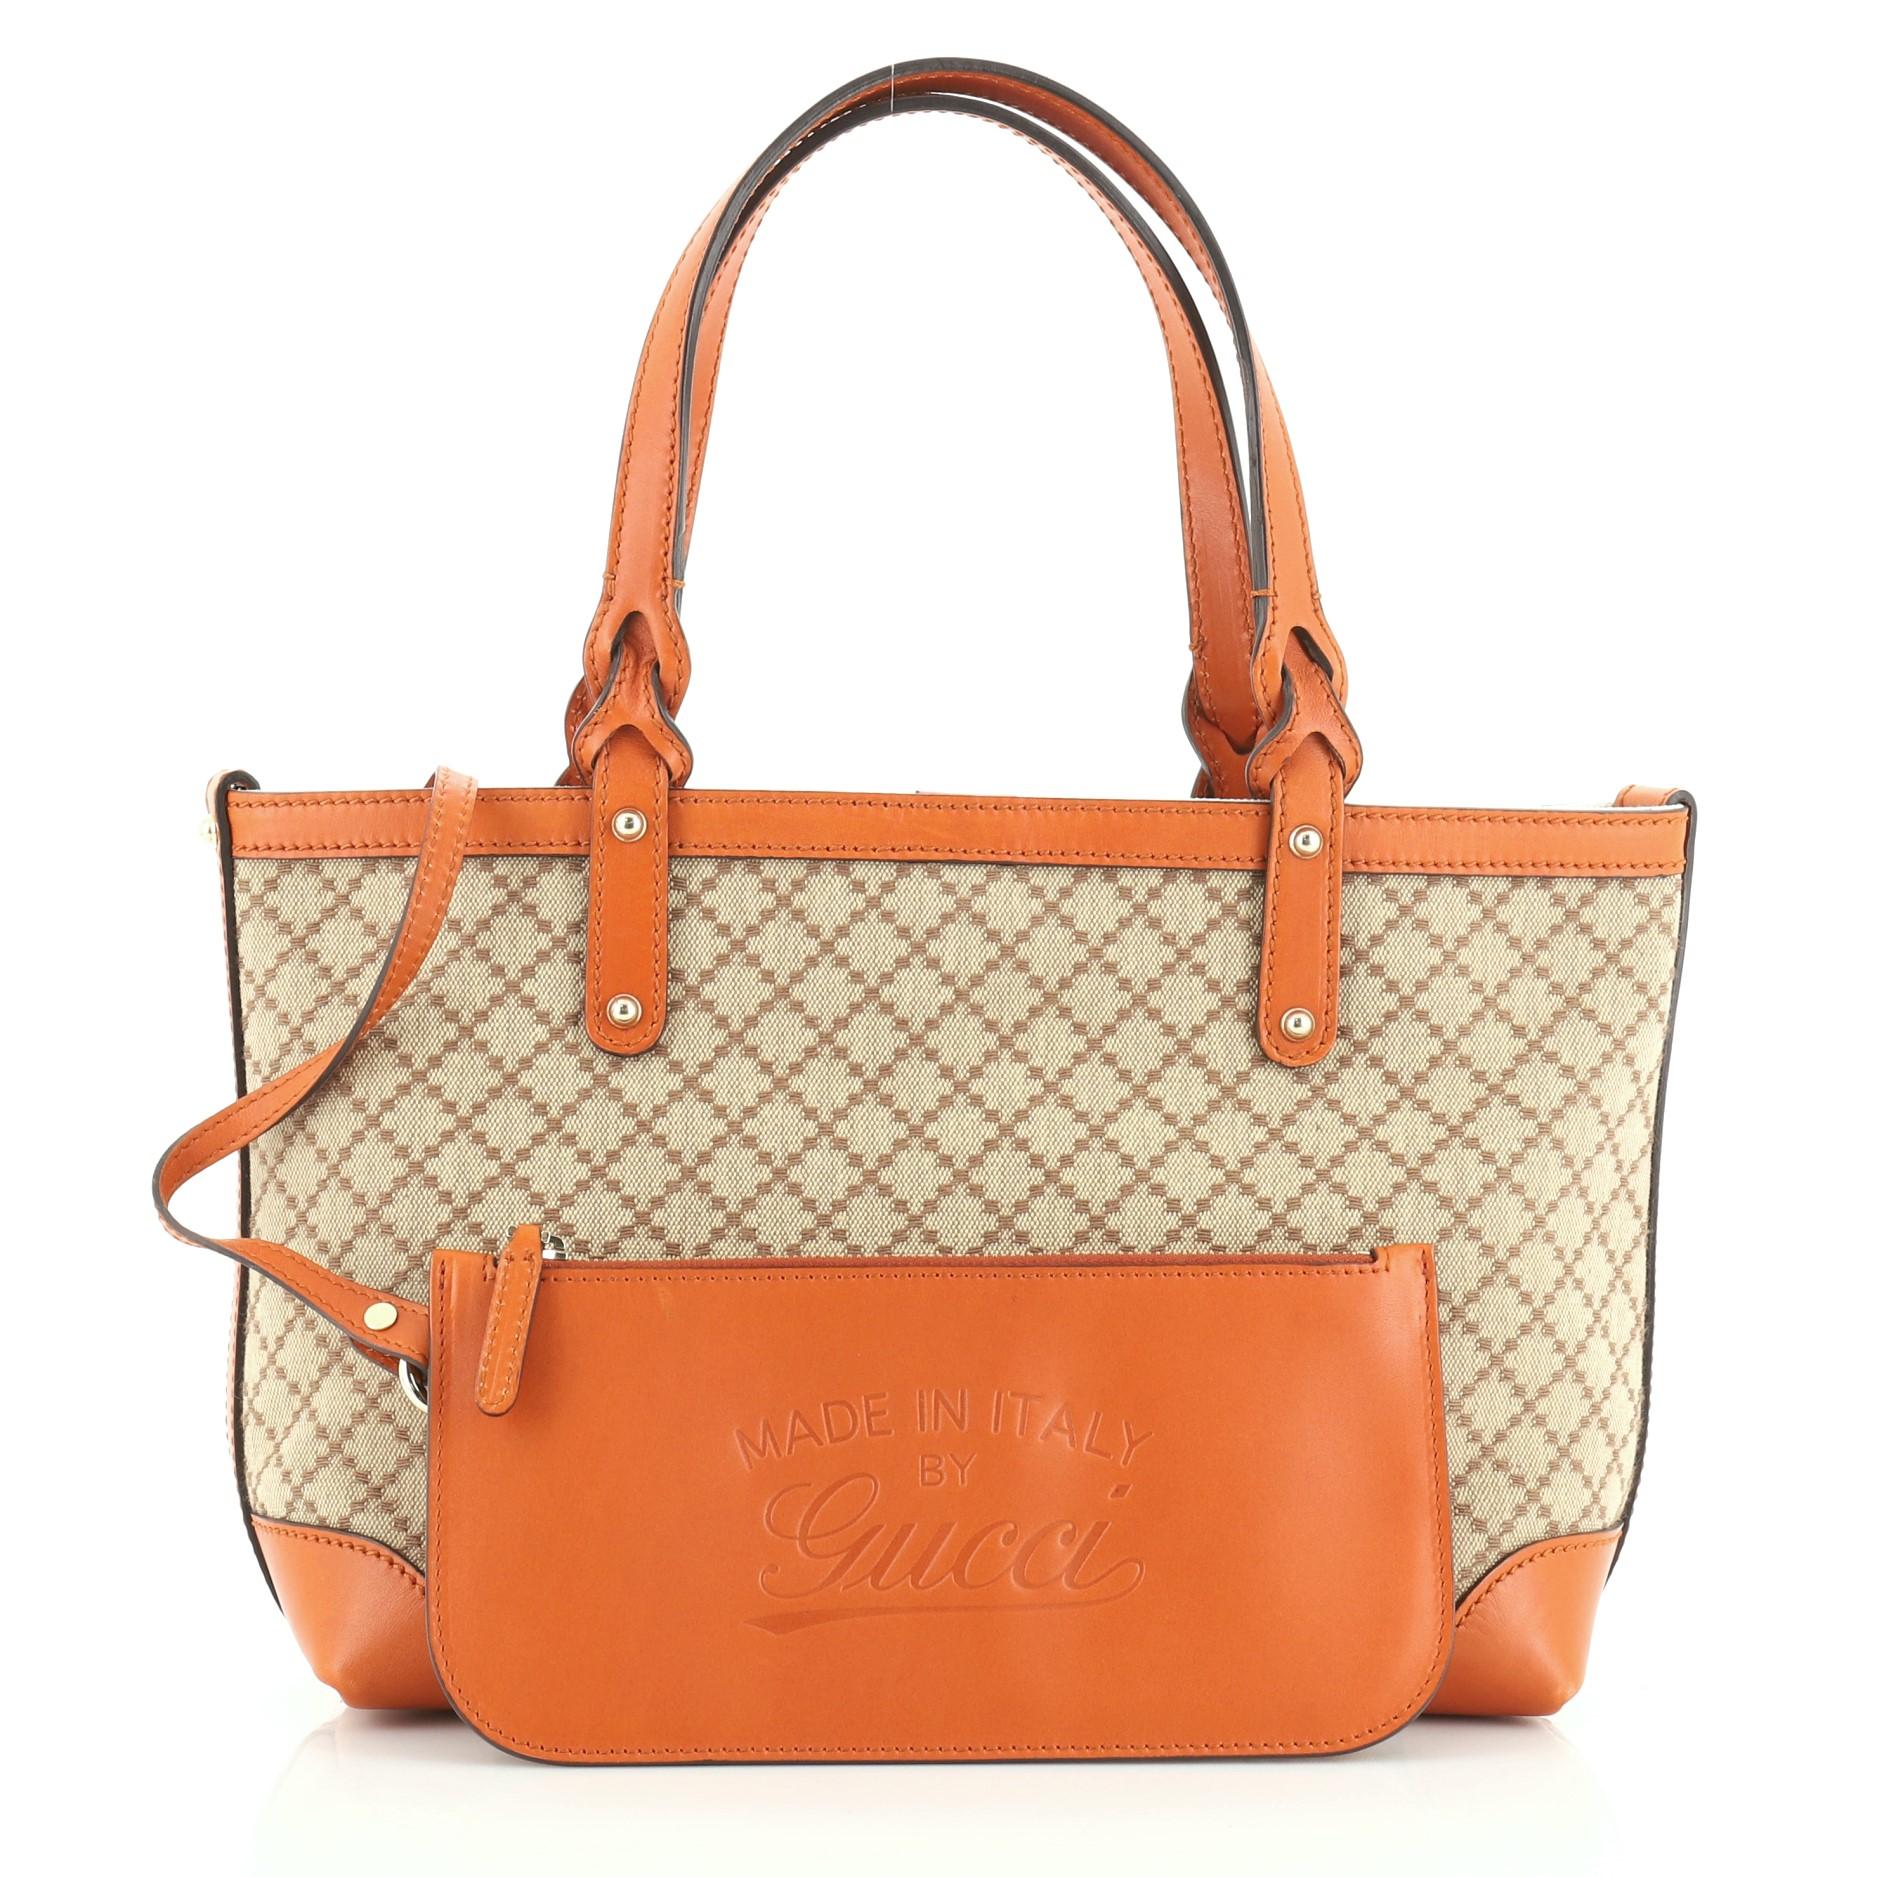 This Gucci Craft Tote Diamante Canvas Small, crafted from brown diamante canvas with orange leather trims, this tote features dual-flat handles with braided ends and gold-tone hardware. Its hook closure opens to a neutral fabric interior.